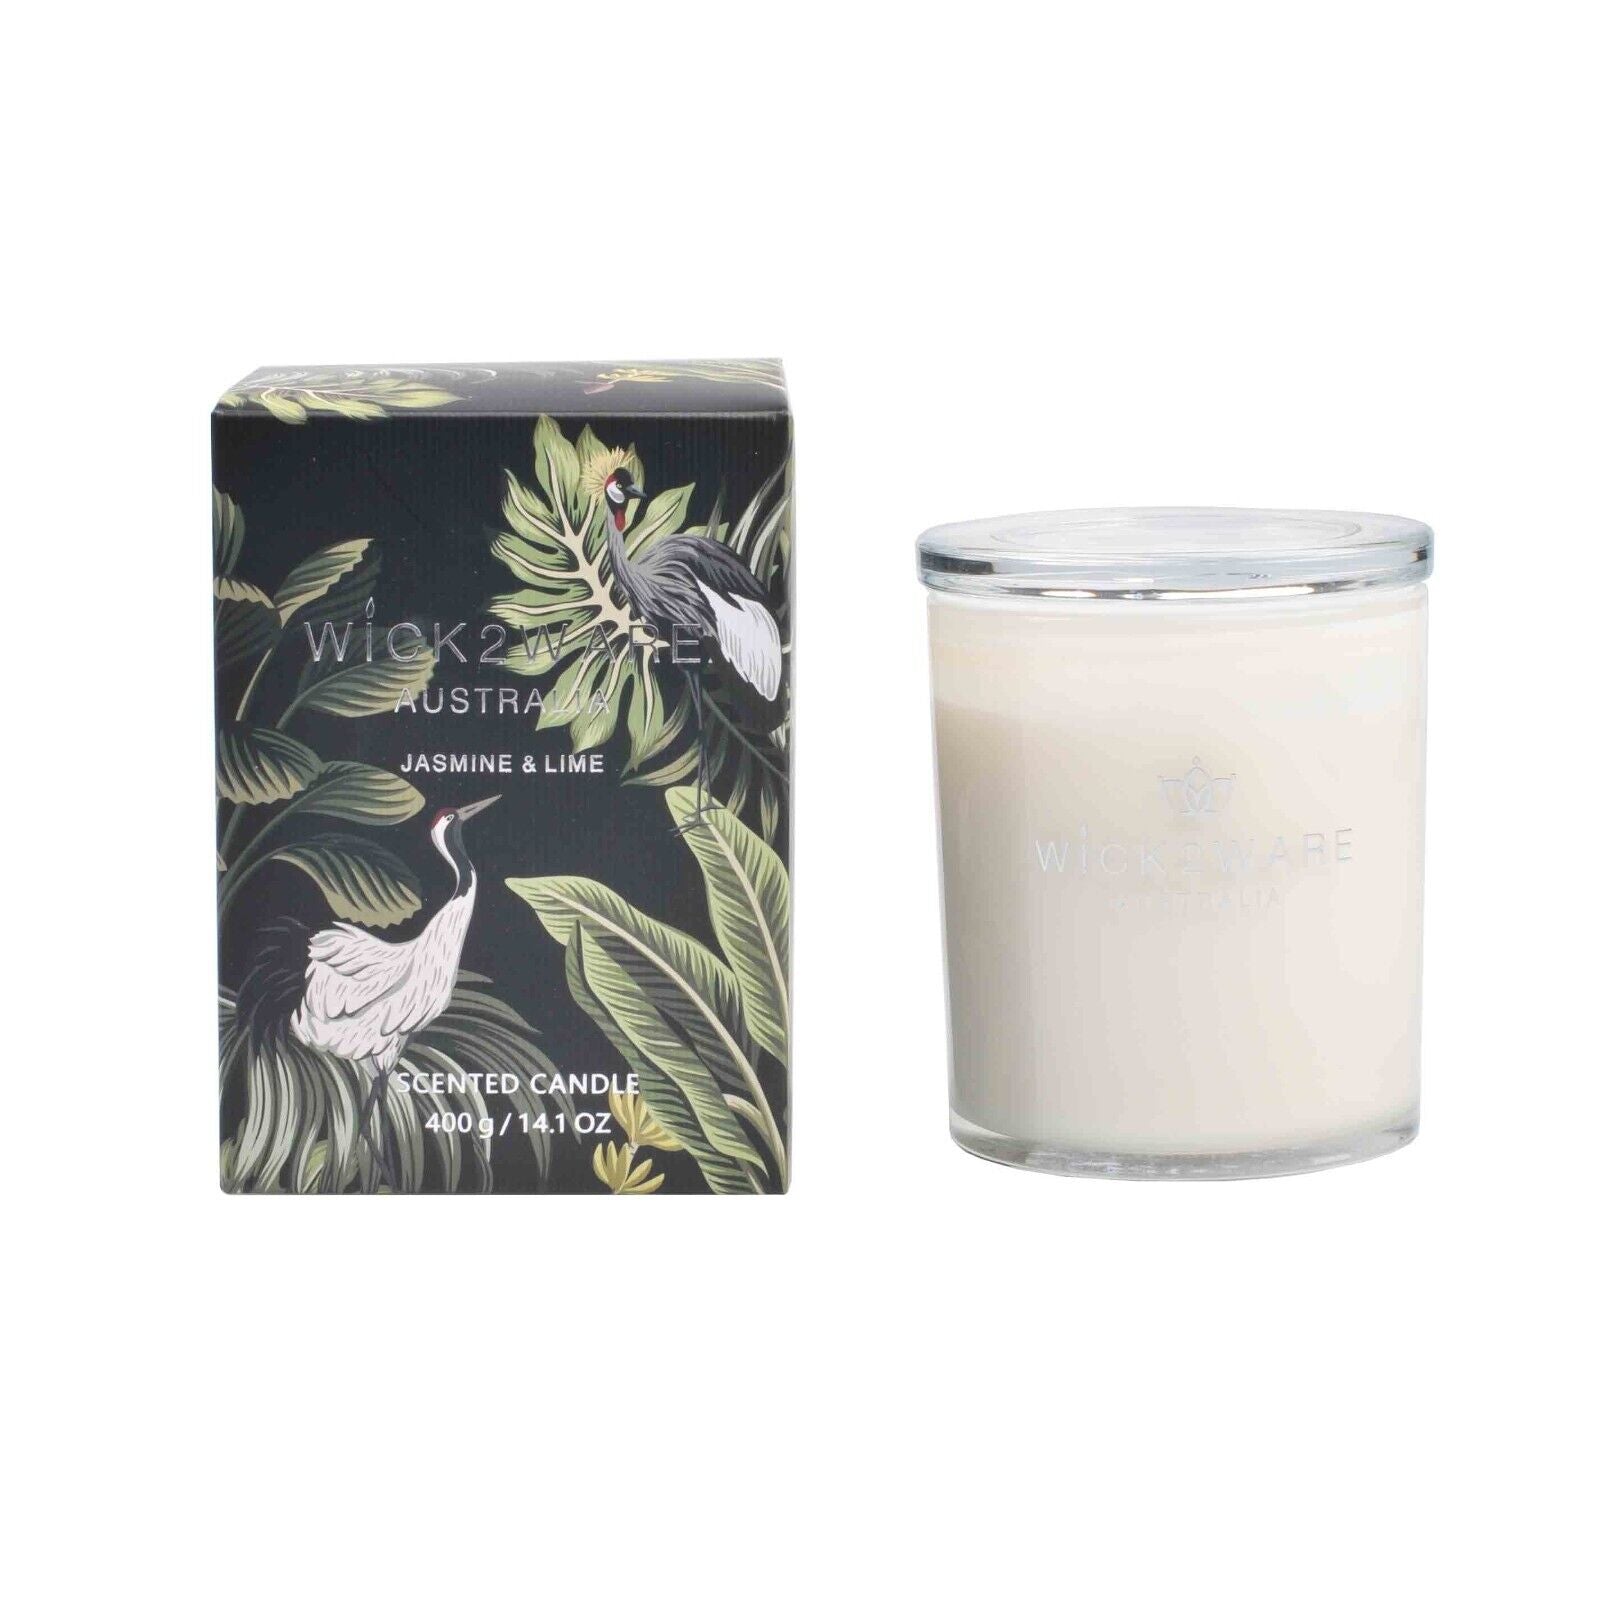 Wick2Ware Australia Scented Candle Jasmine and Lime 400g/14.1 OZ - Sensory Circle